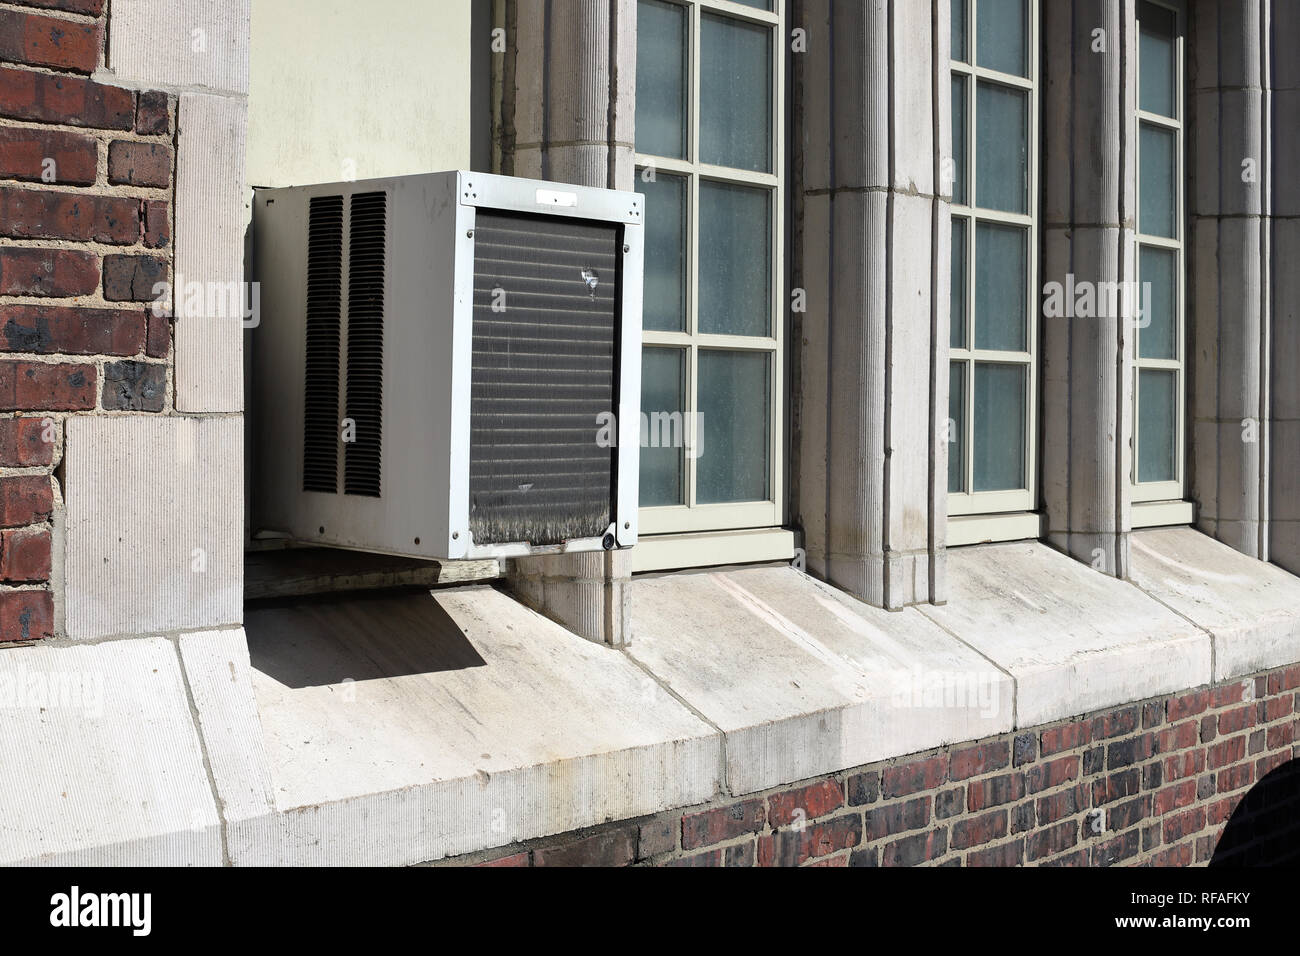 Window Air Conditioner unit on old brick building Stock Photo